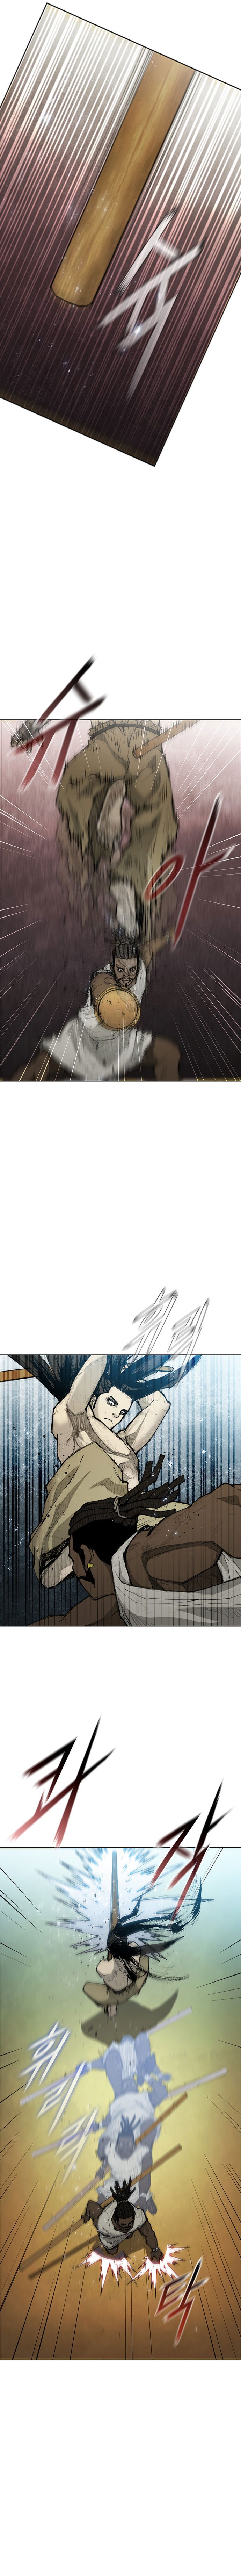 long-way-of-the-warrior-chap-31-3